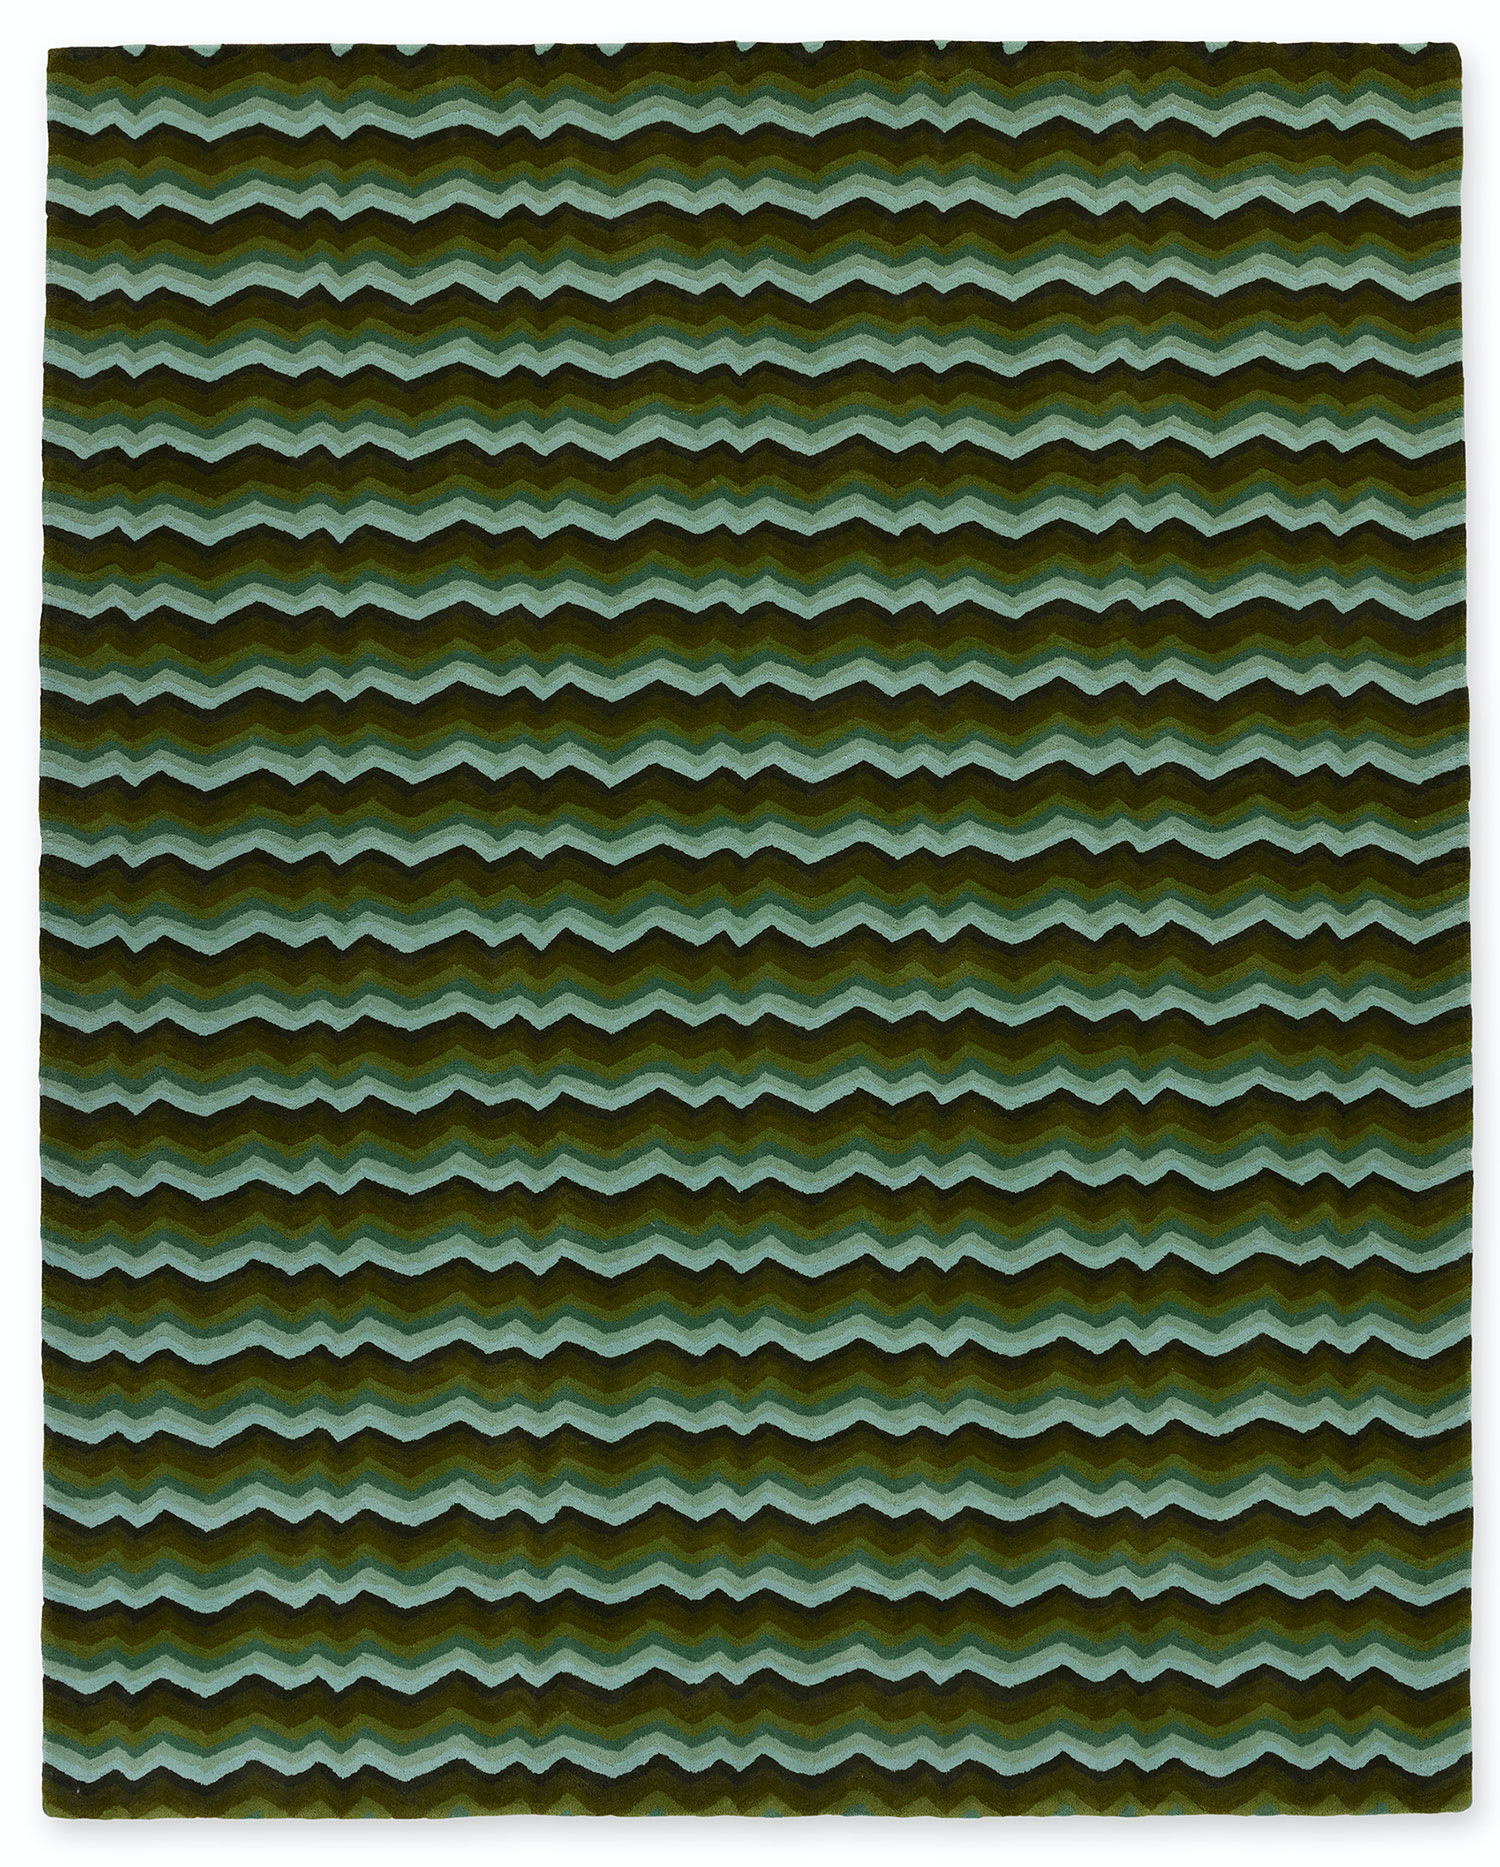 A large, modern area rug in green tones called Buzz Emerald